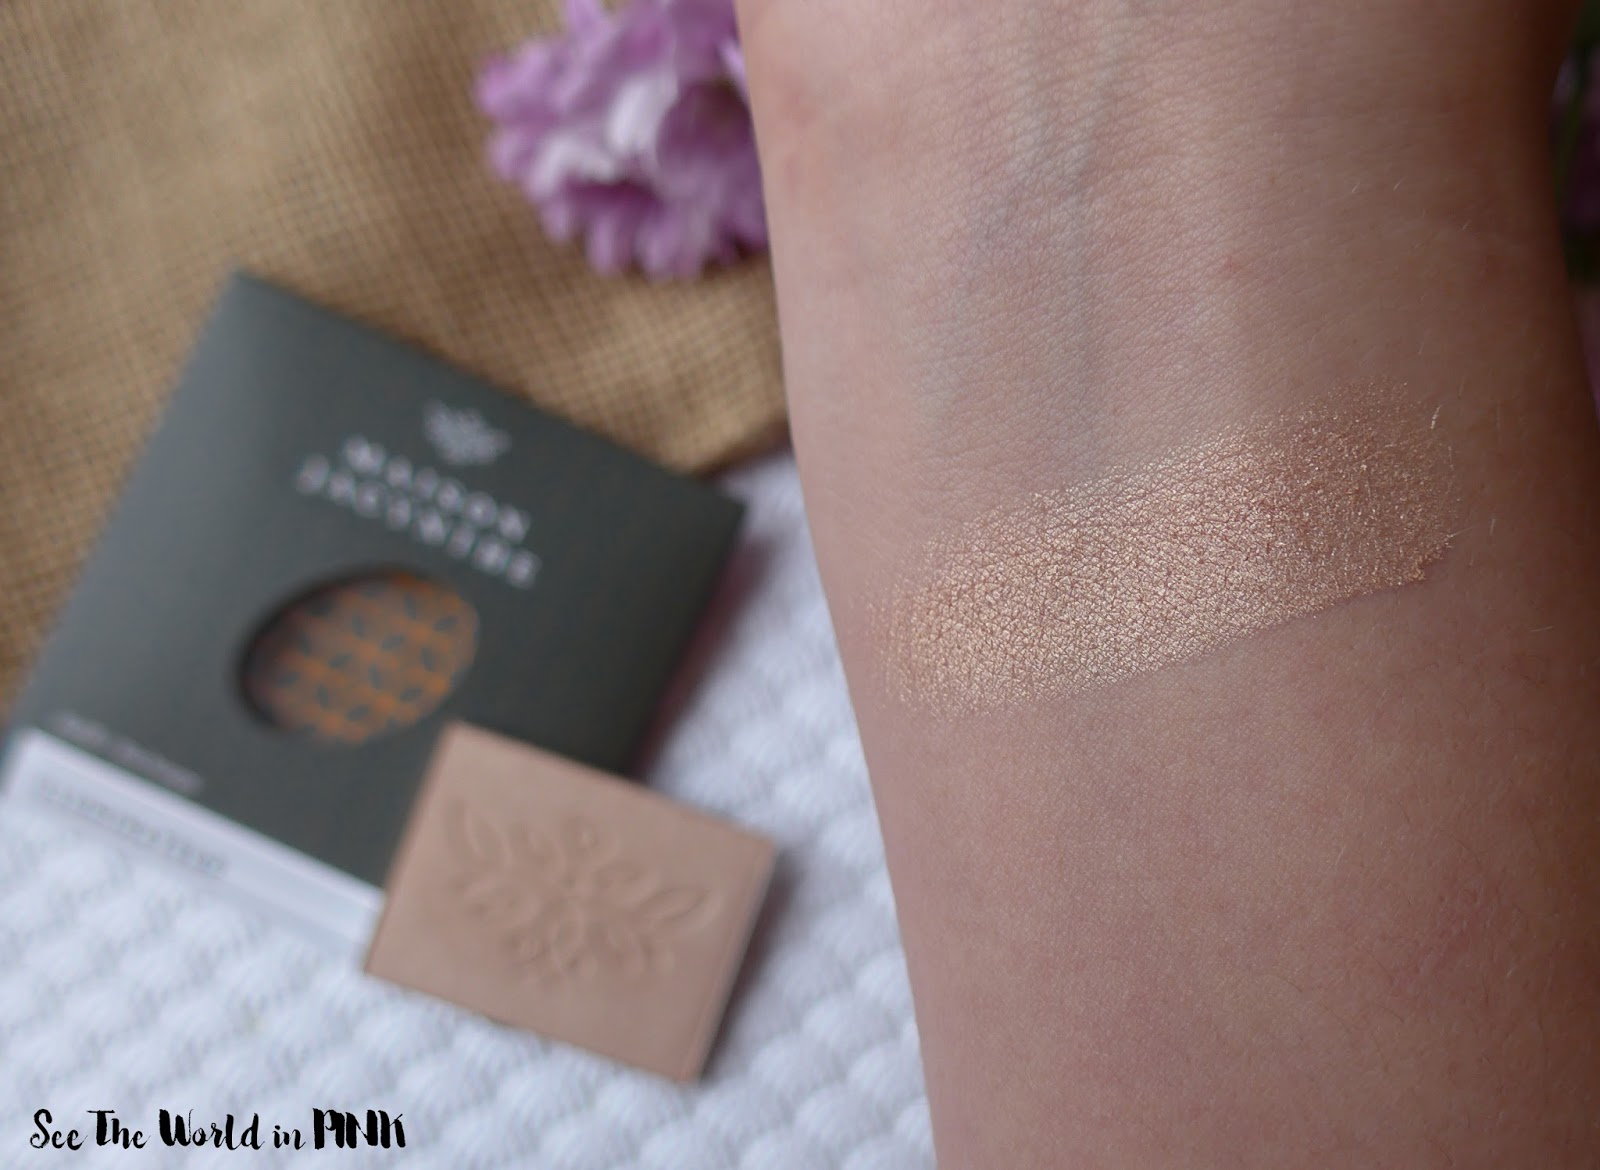 Maison Jacynthe Makeup - Foundation and Illuminator Try-on, Swatches and Reviews! 